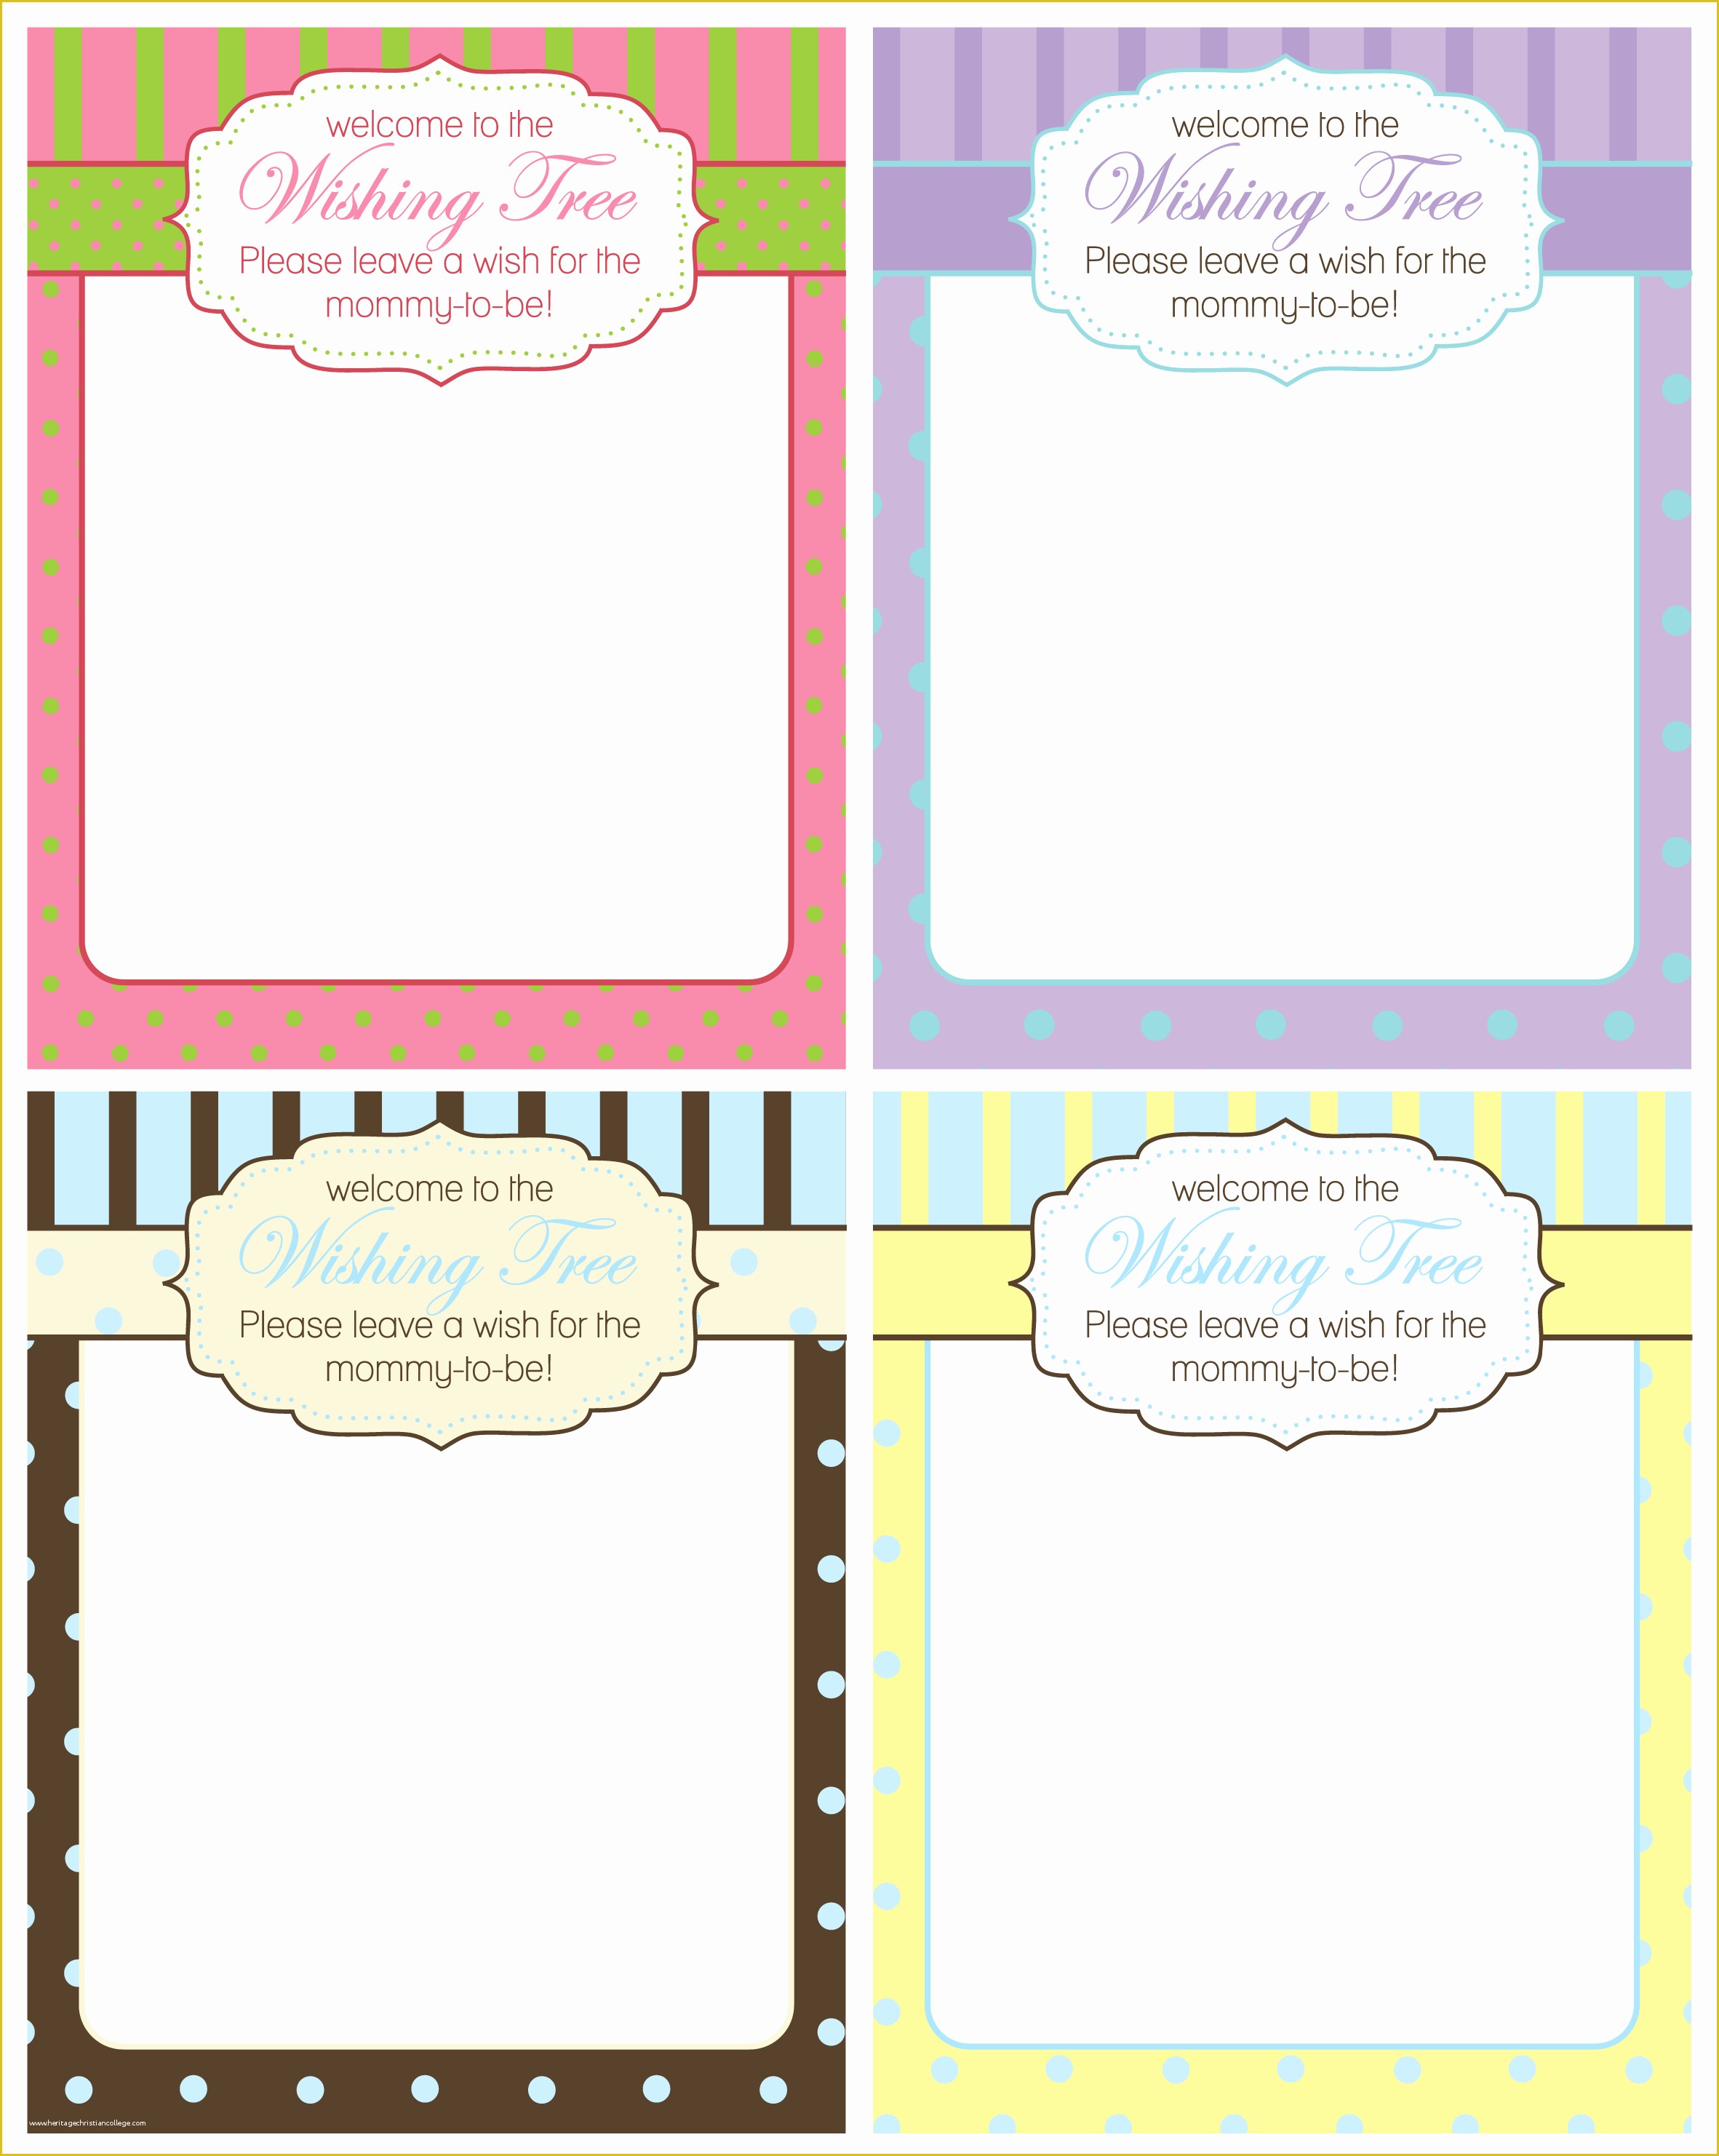 Free Printable Baby Cards Templates Of Free Baby Shower Wishing Tree Cards From A Party Studio